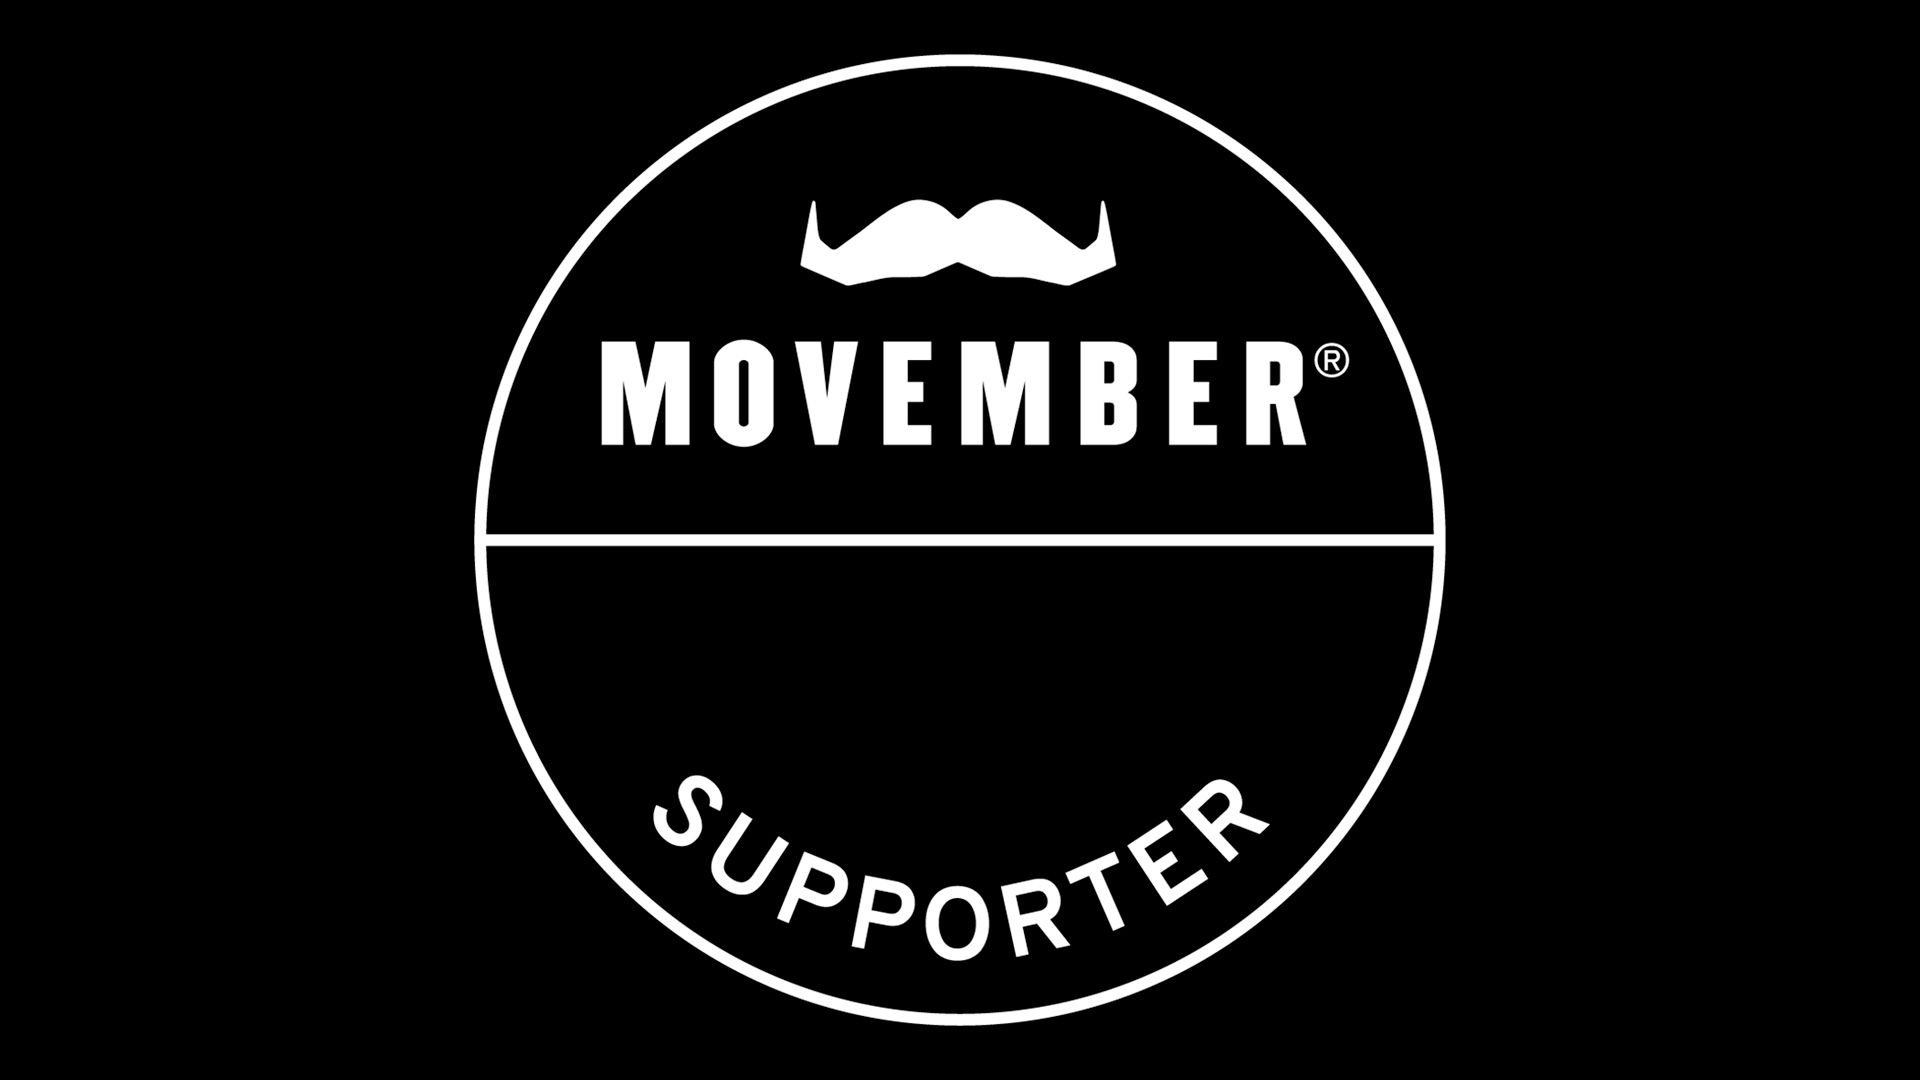 A white on black badge that says: "Movember Supporter". It is surmounted by a white Movember moustache logo.